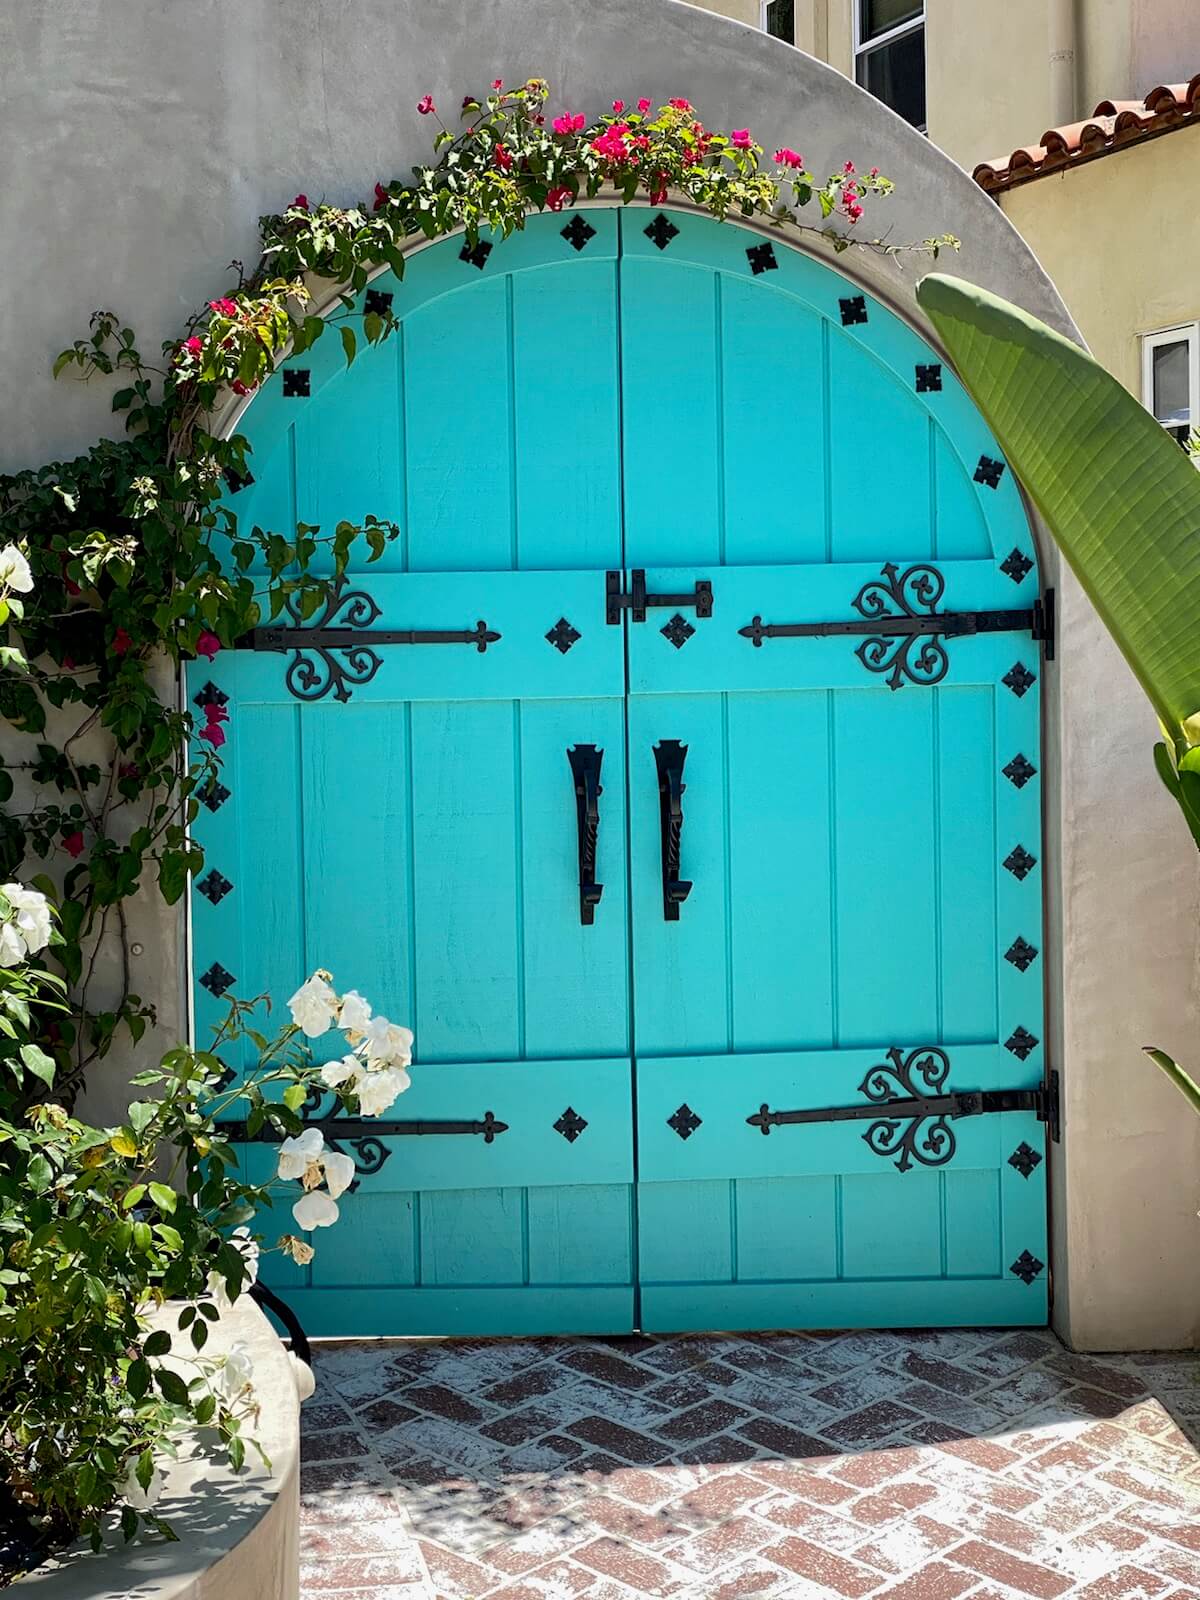 A bright blue door. Metaphorical maybe?